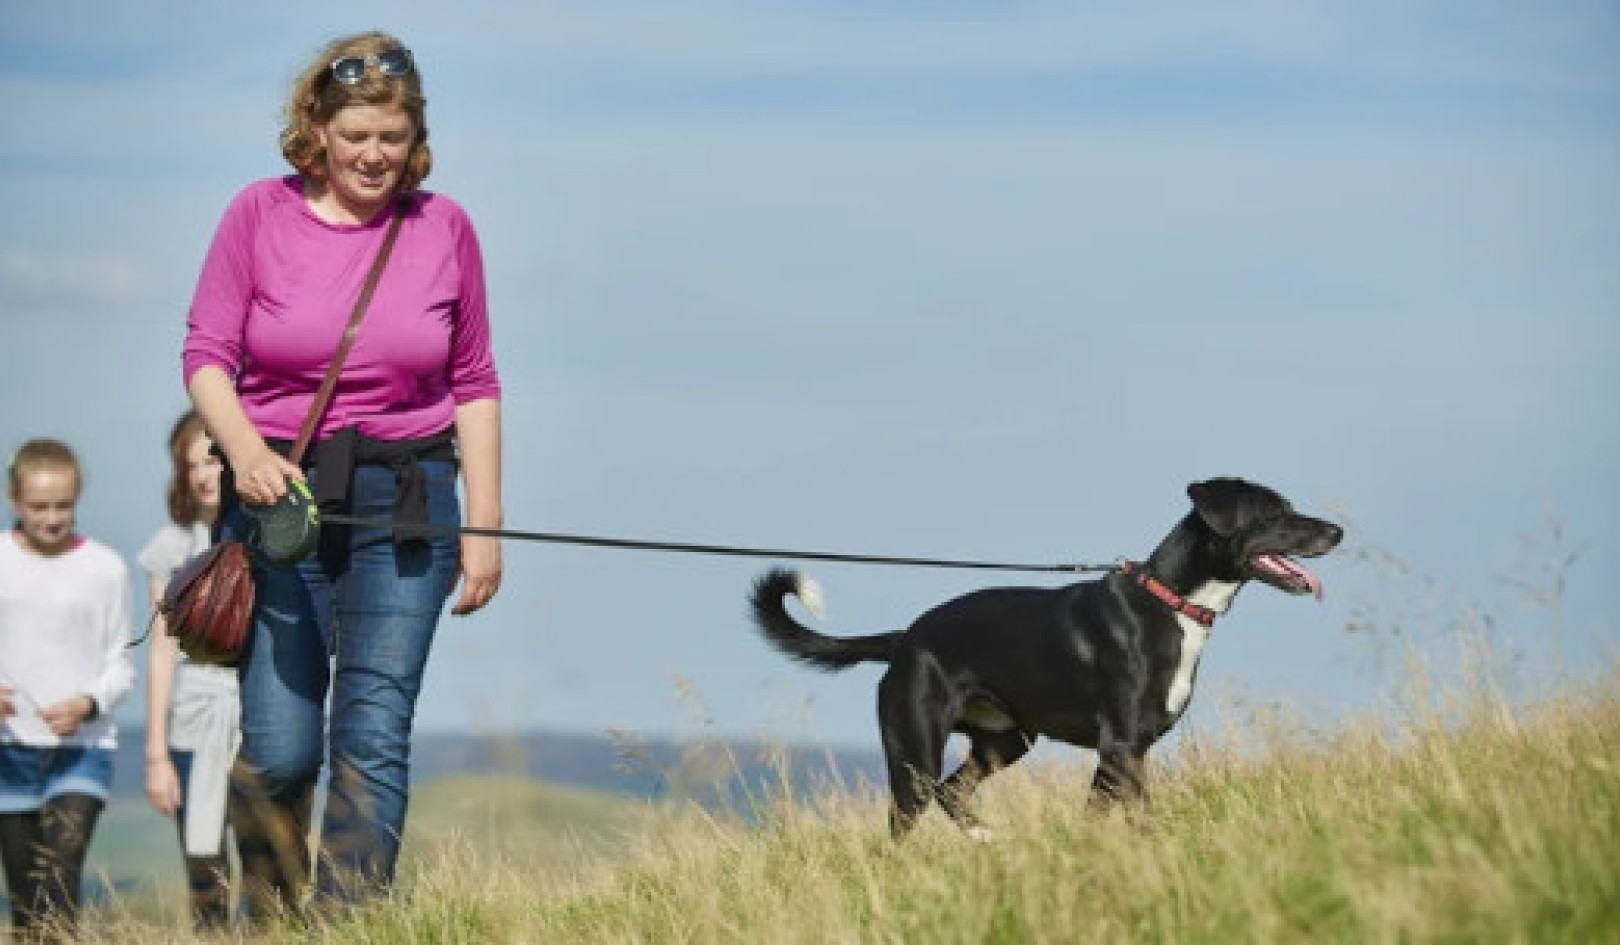 How to Avoid Injury When Walking Your Furry Friend